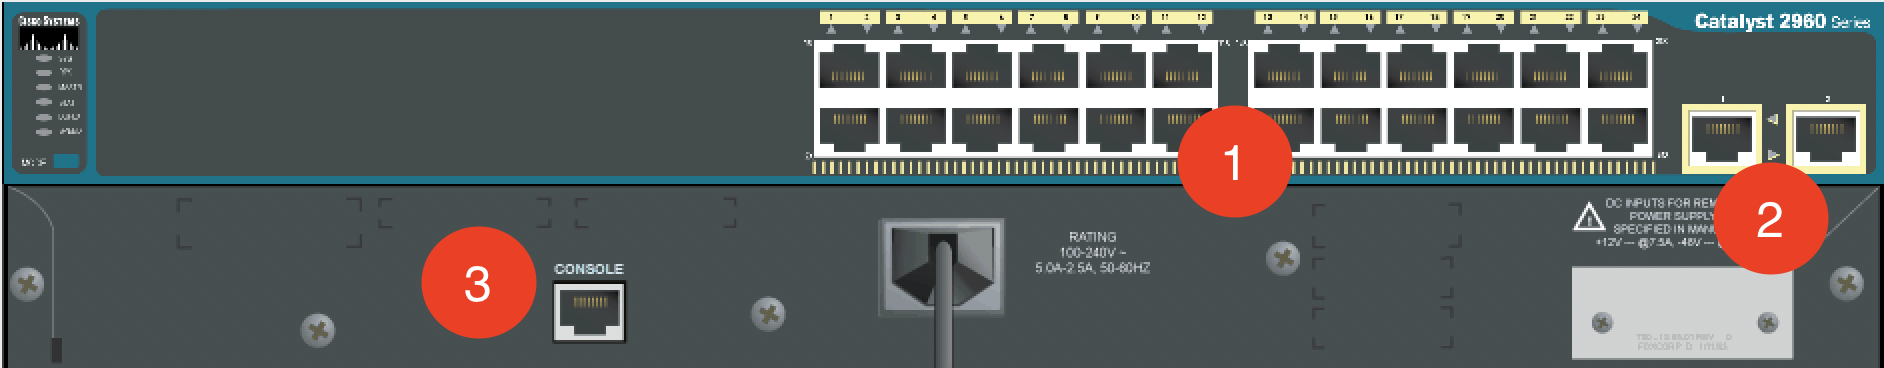 Screenshot of the back view of a Cisco Catalyst 2960